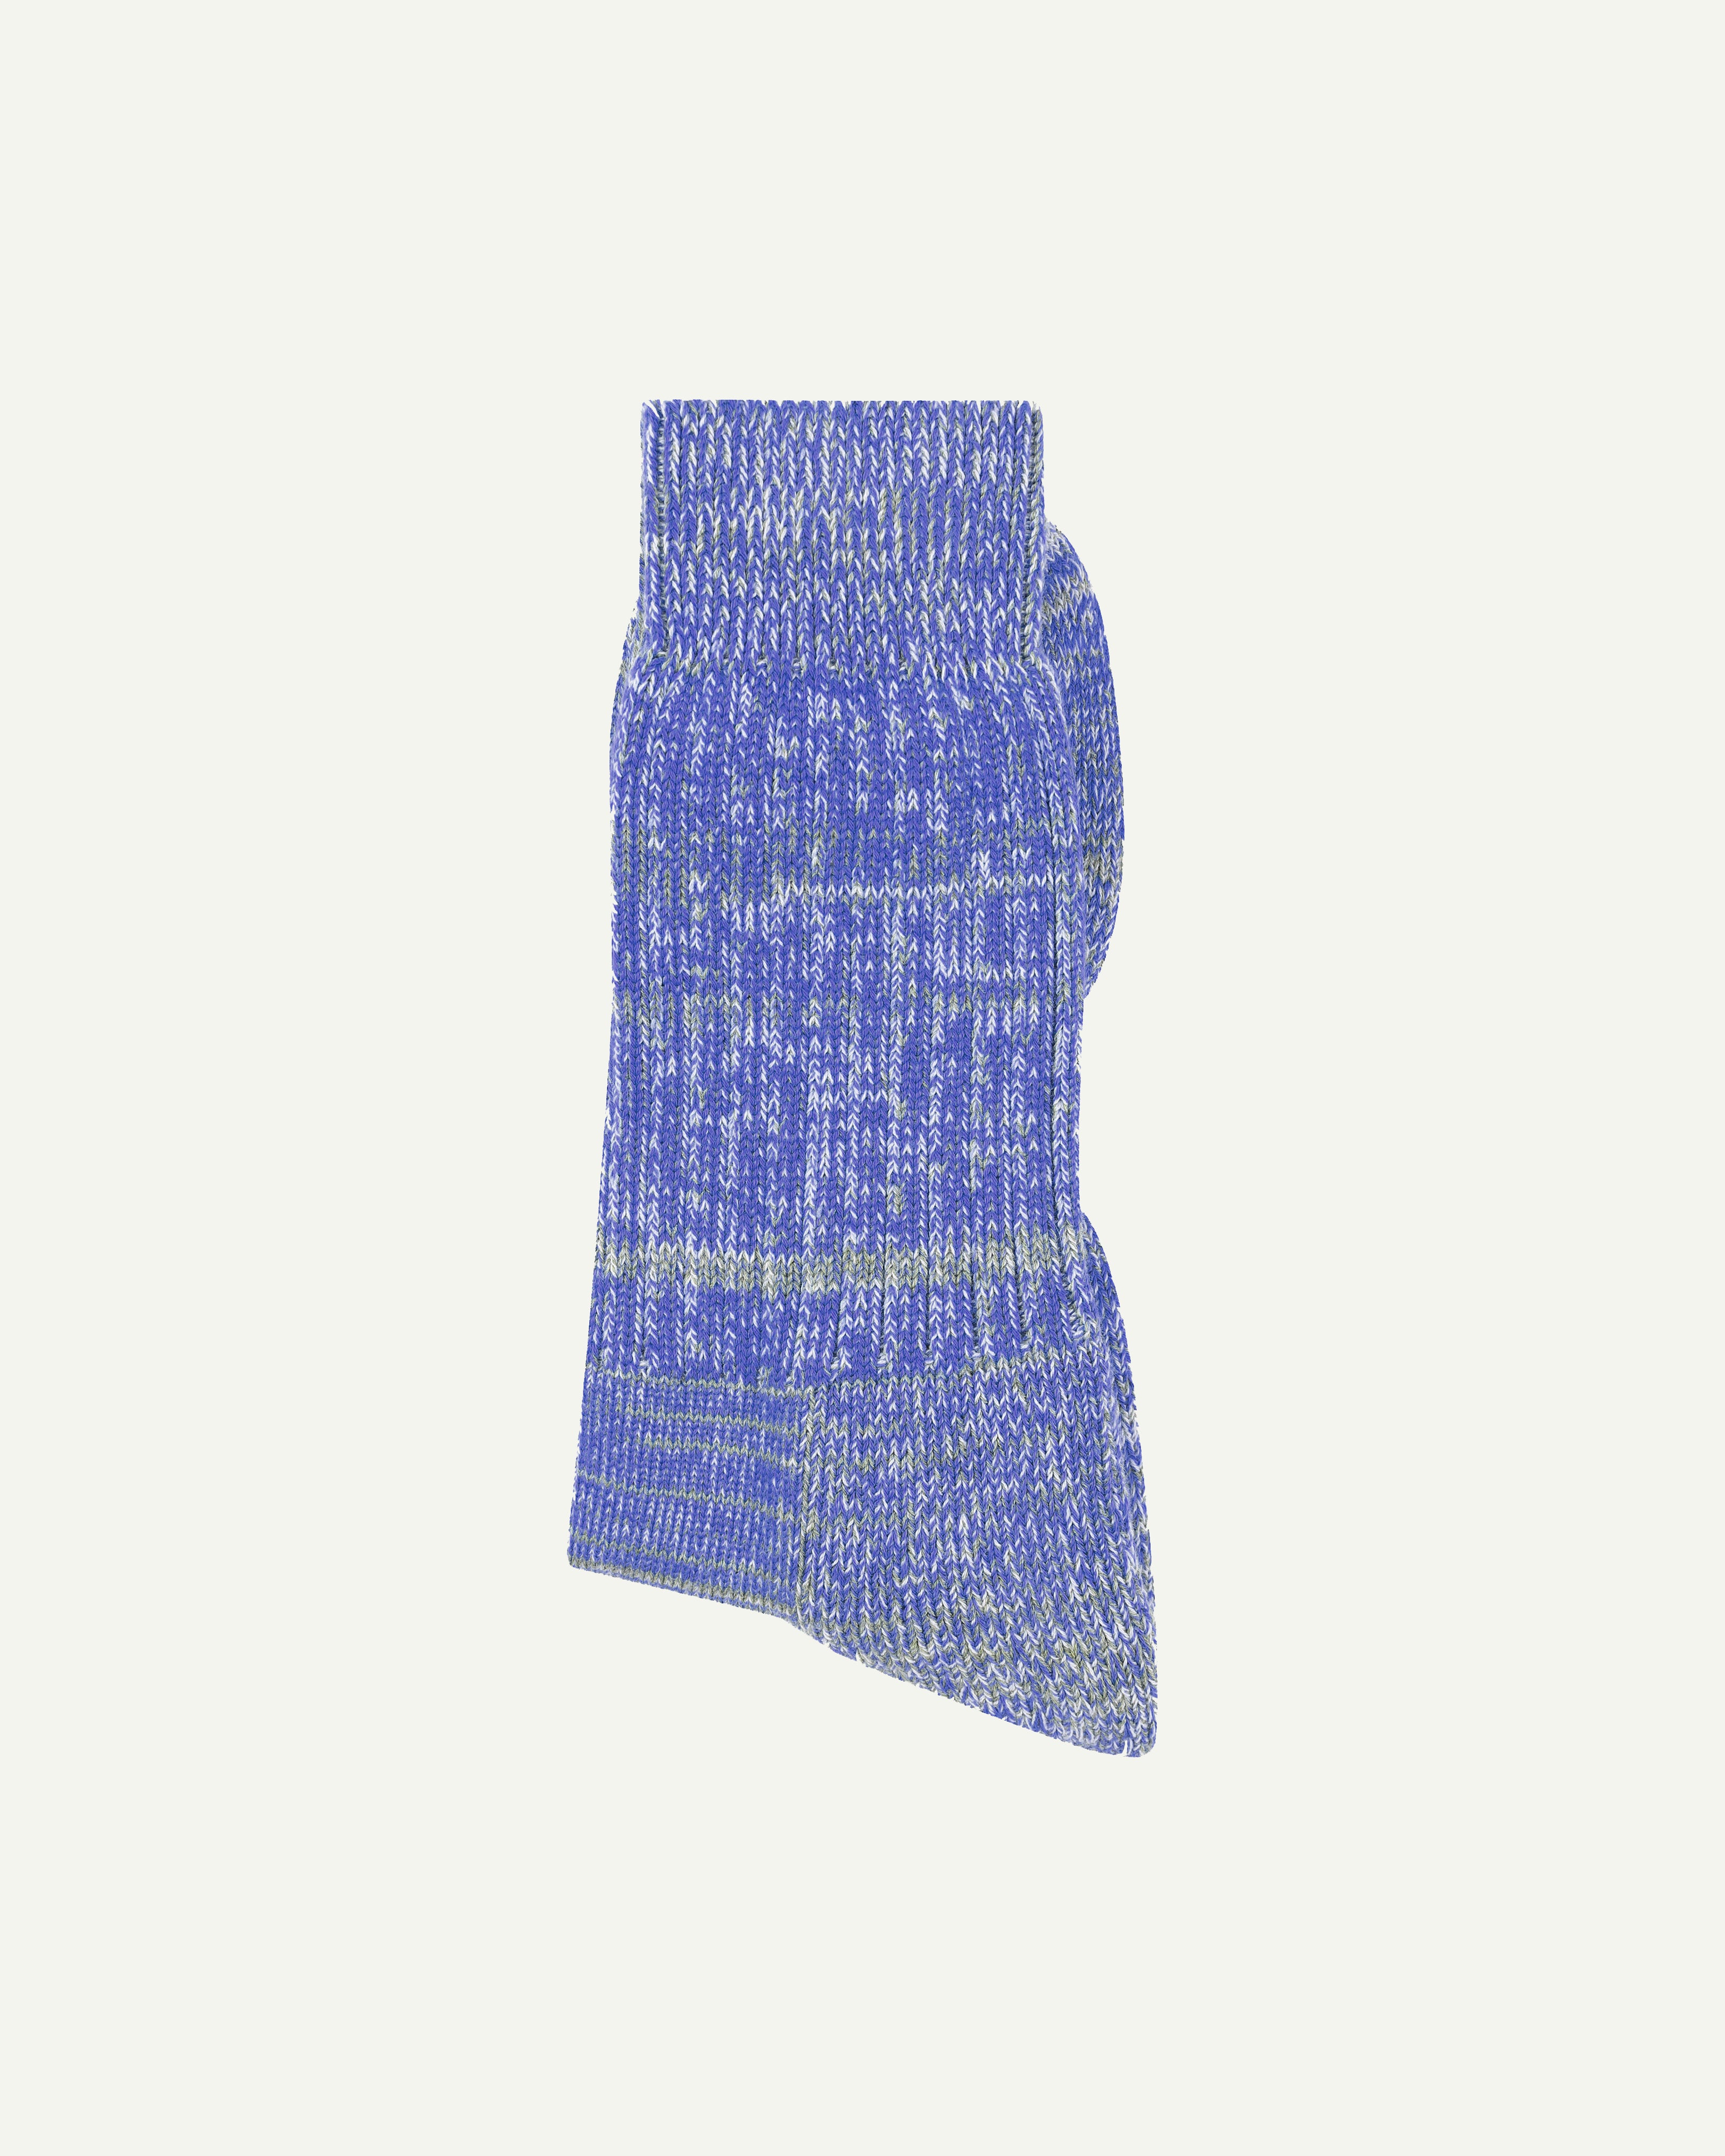 Folded shot of Uskees #4006 organic cotton socks in ultra blue